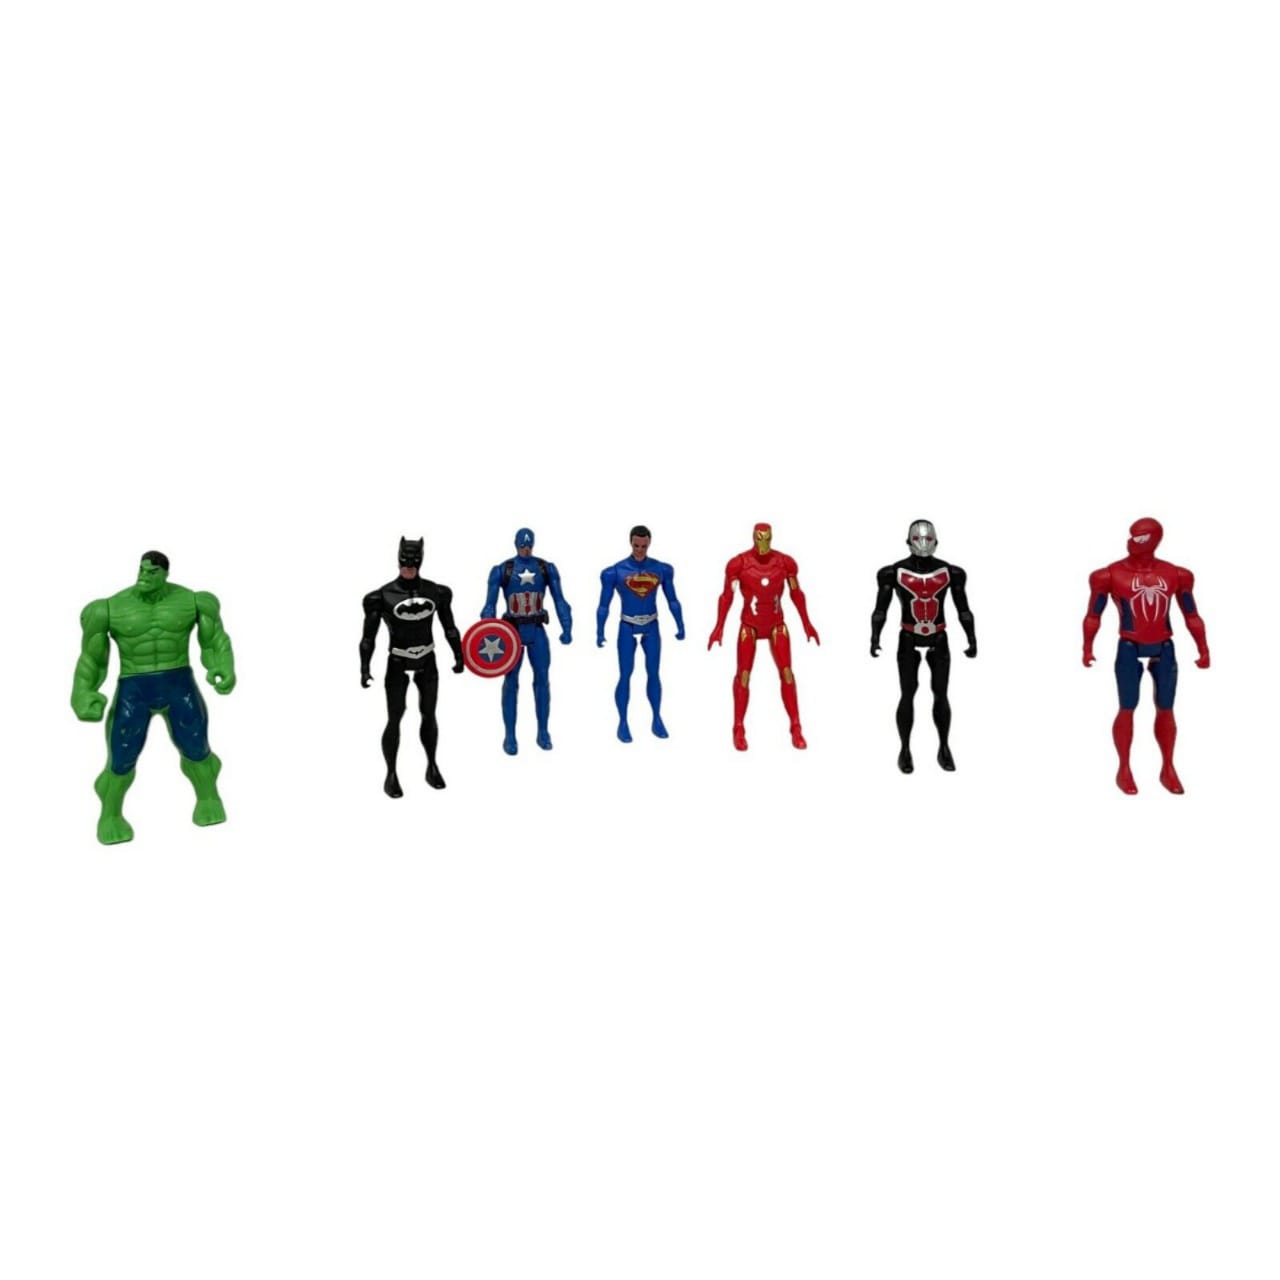 Marvellous Avengers Infinity War Alliance Leader Projection Action Figures Play